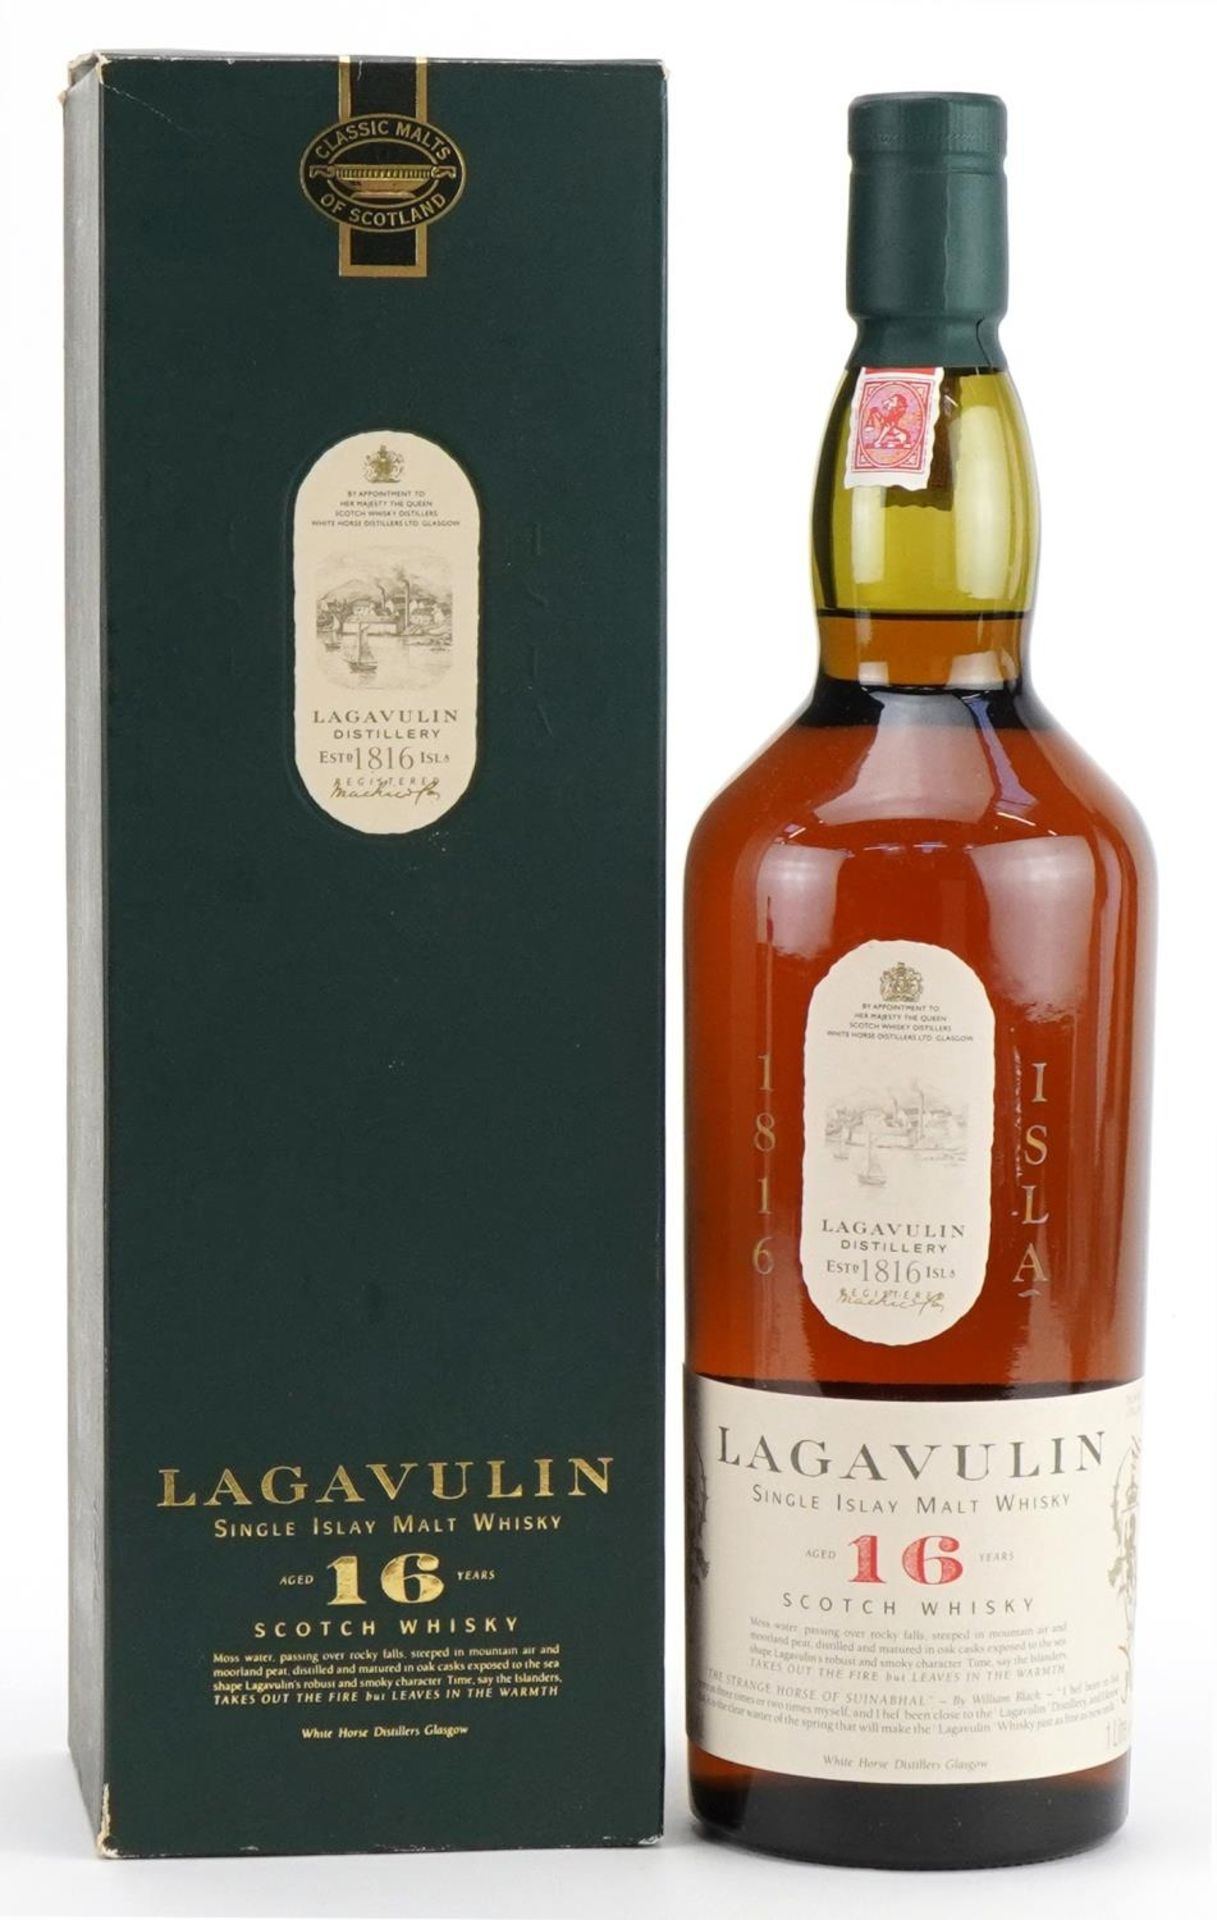 One litre bottle of Lagavulin Single Isla Malt whisky aged 16 Years, with box : For further